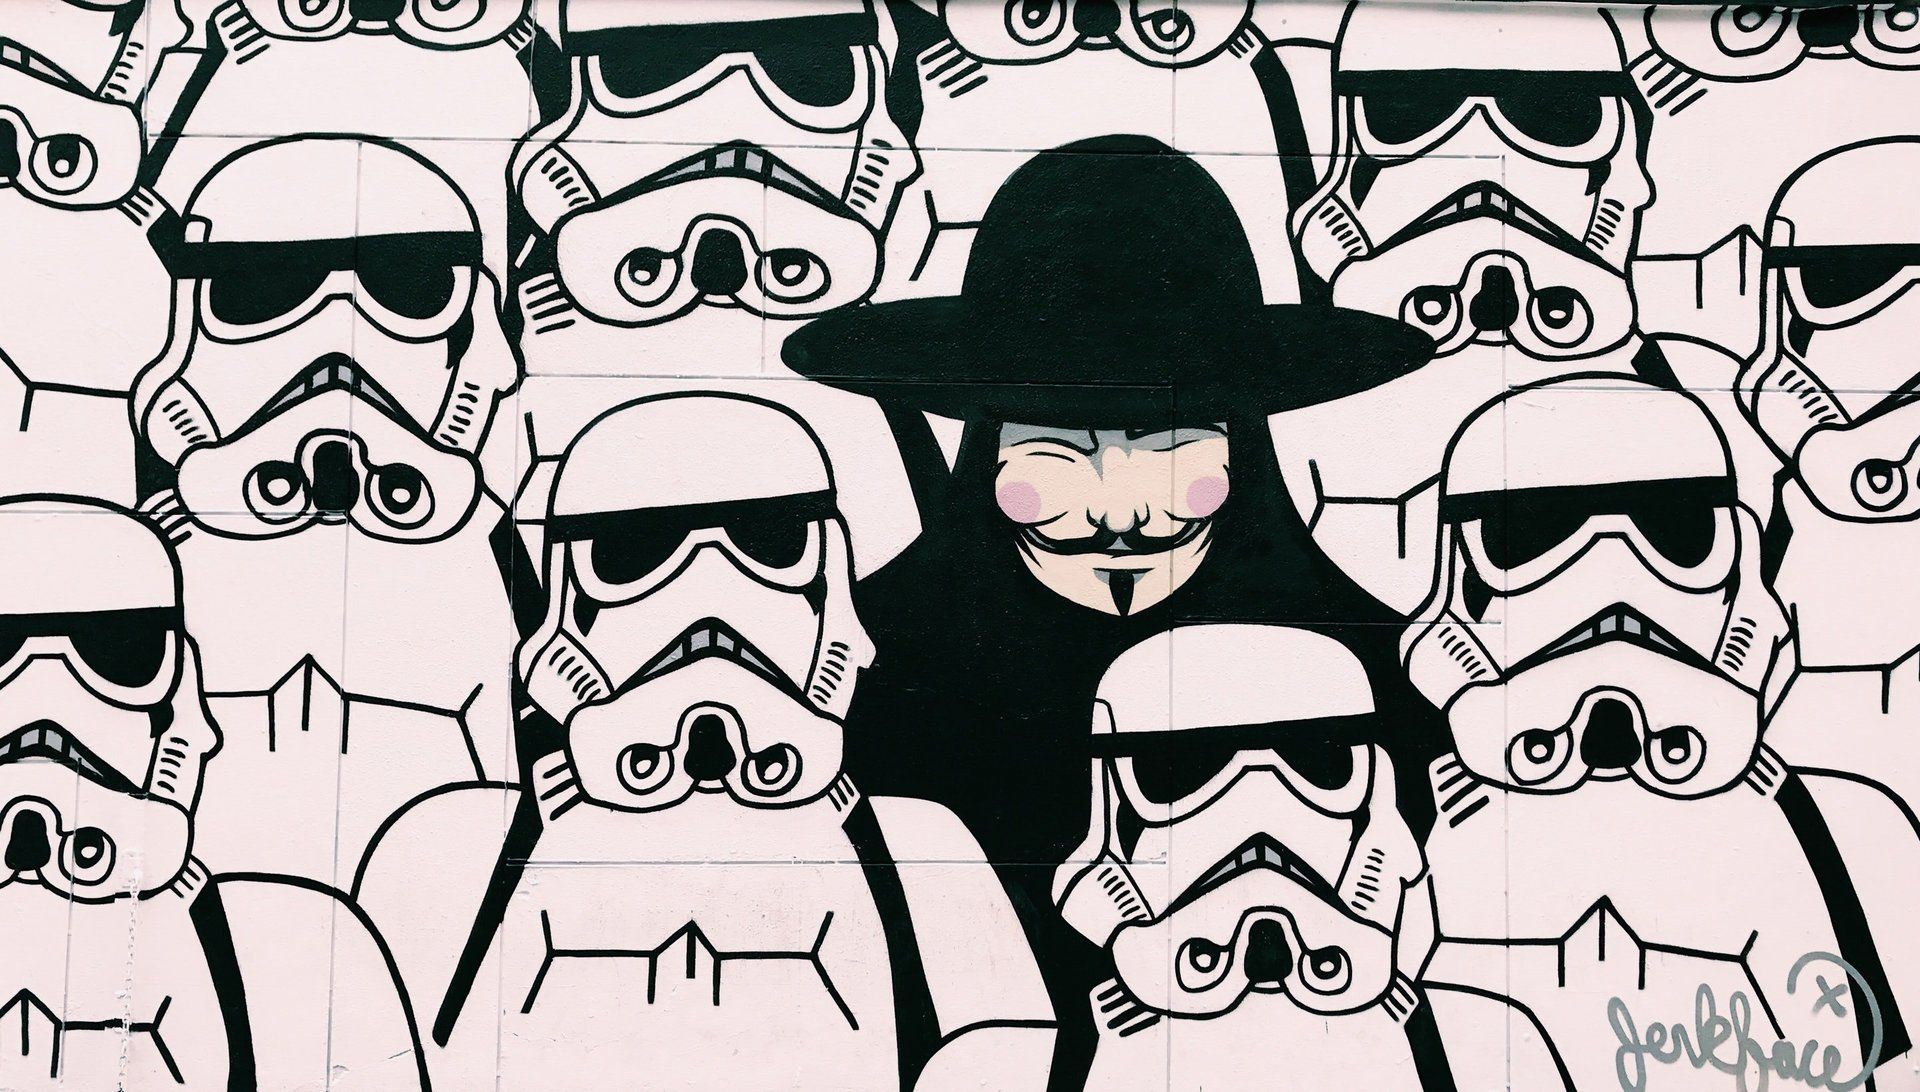 a black and white drawing of stormtroopers and a man in a hat